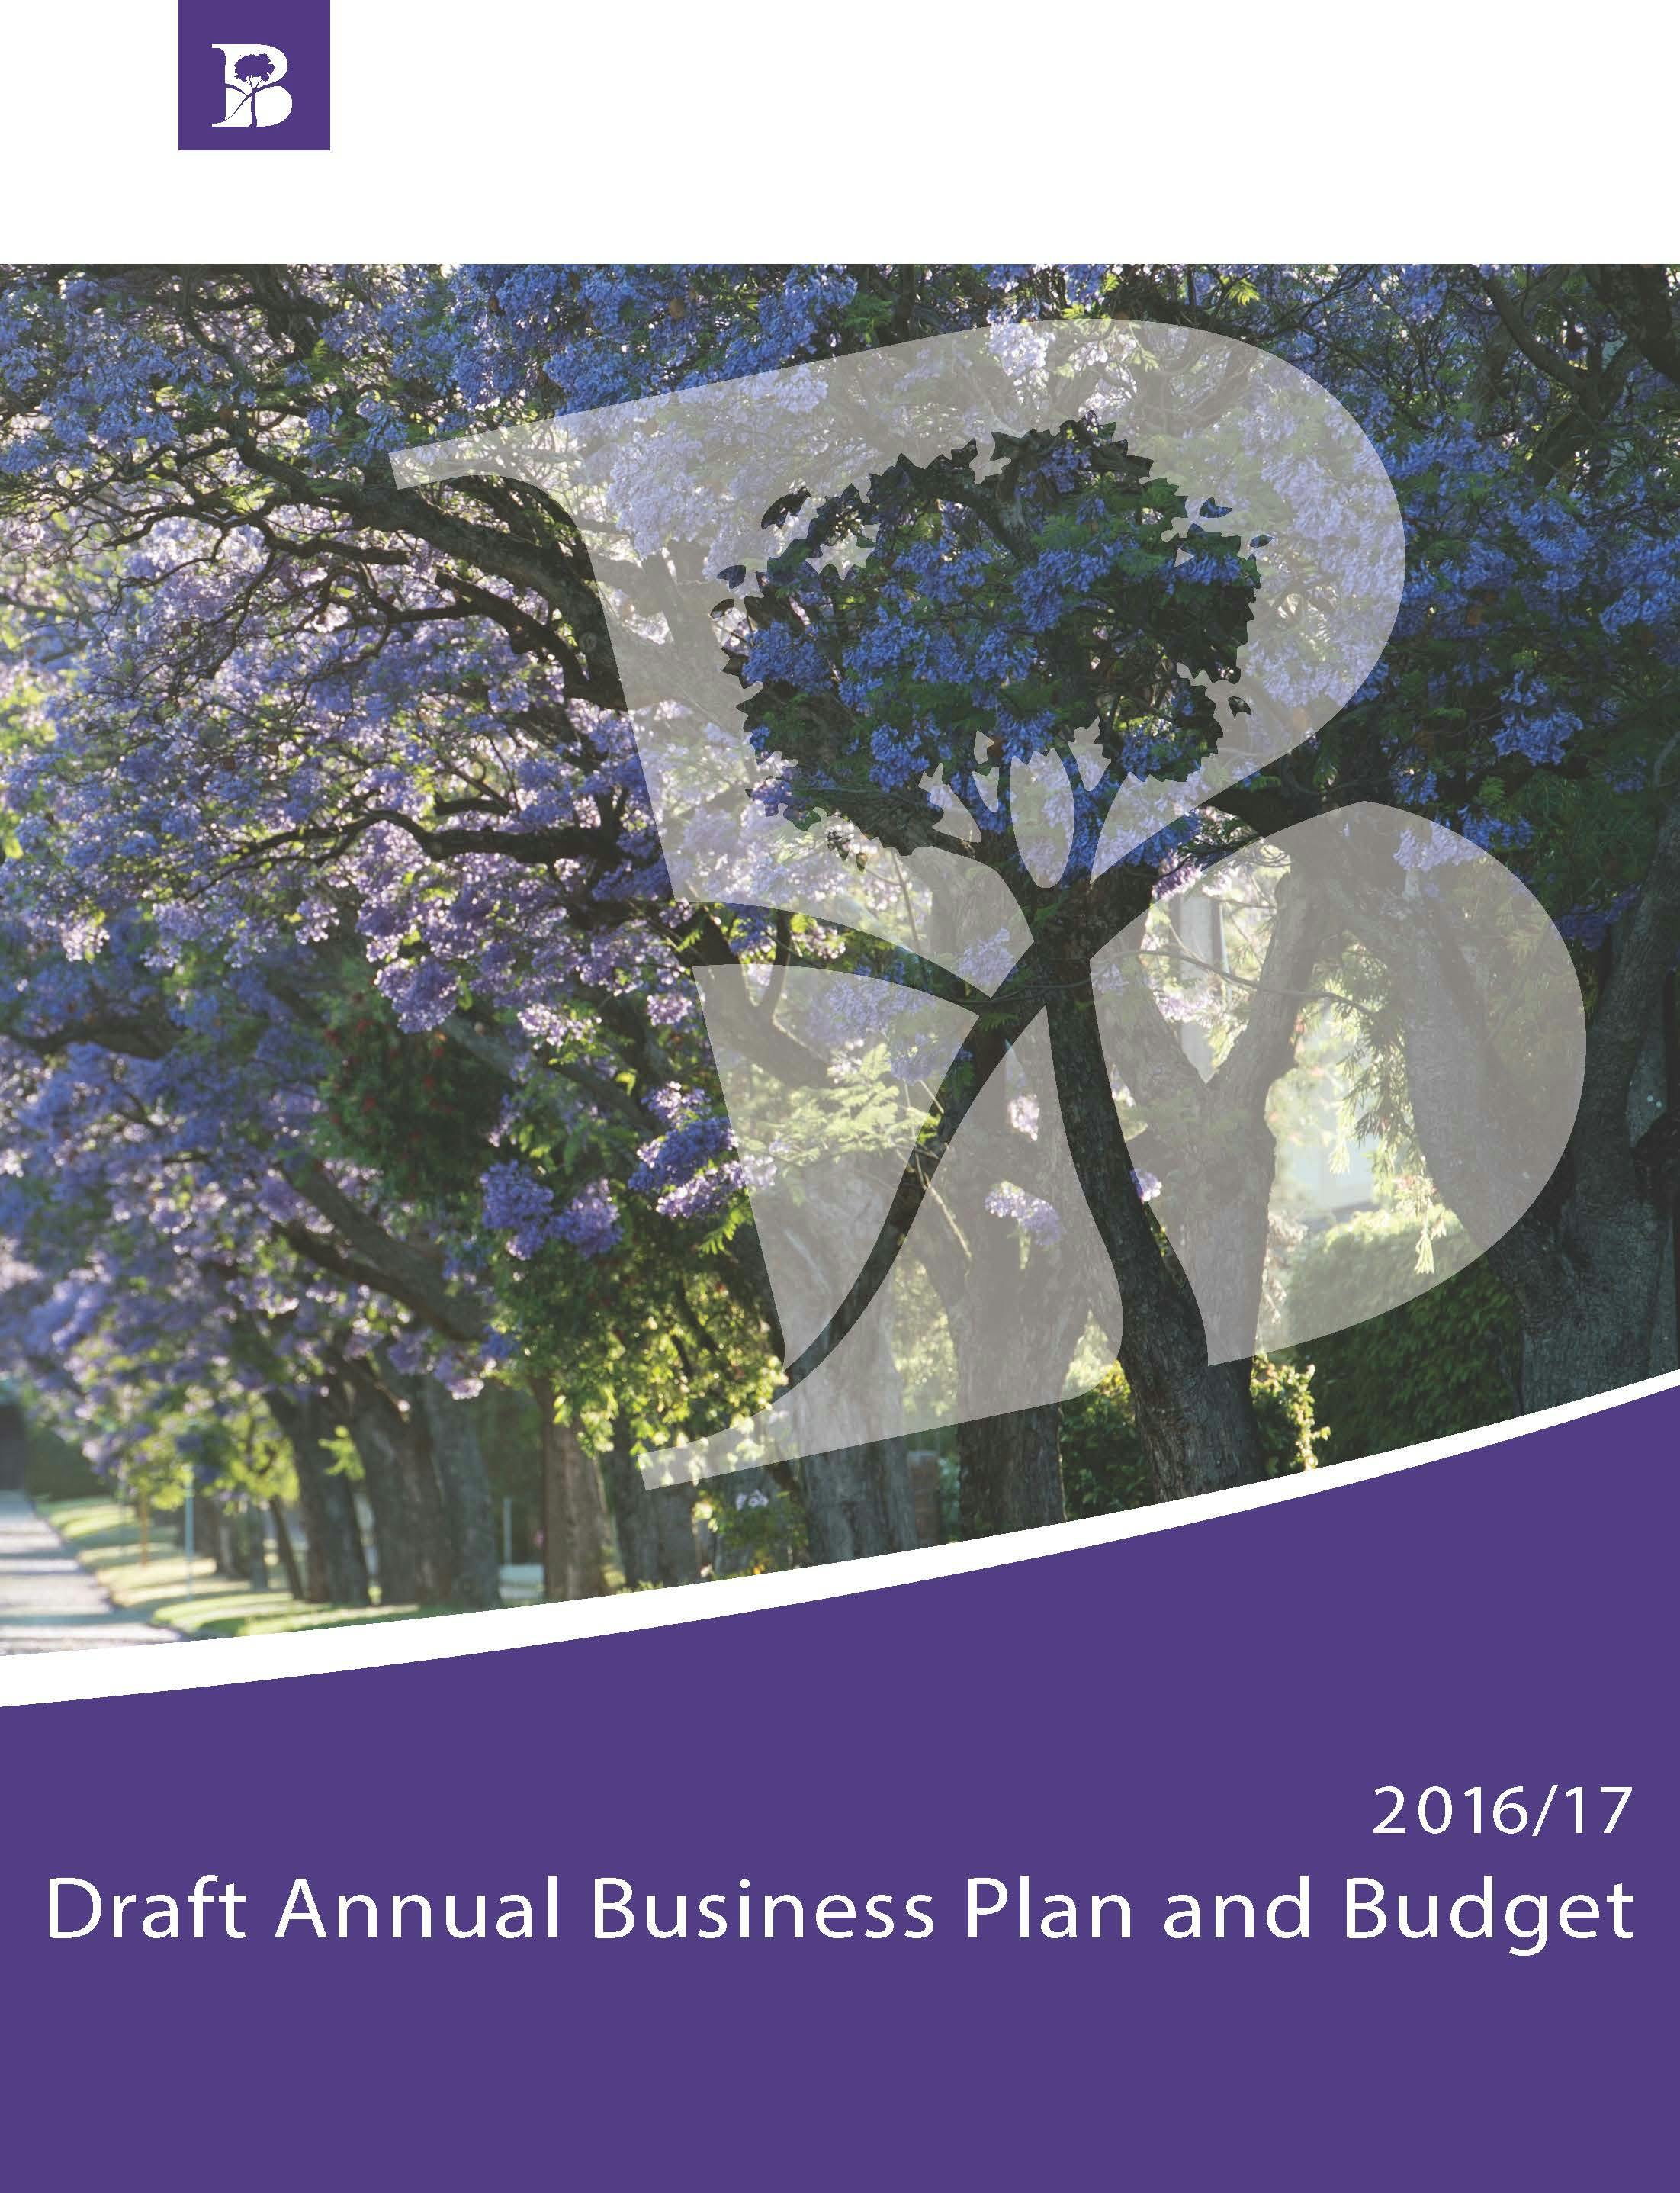 The 2016/17 Draft Business Plan and Budget is available online in the Document Library below. You can also view a copy at the Civic Centre Customer Desk.